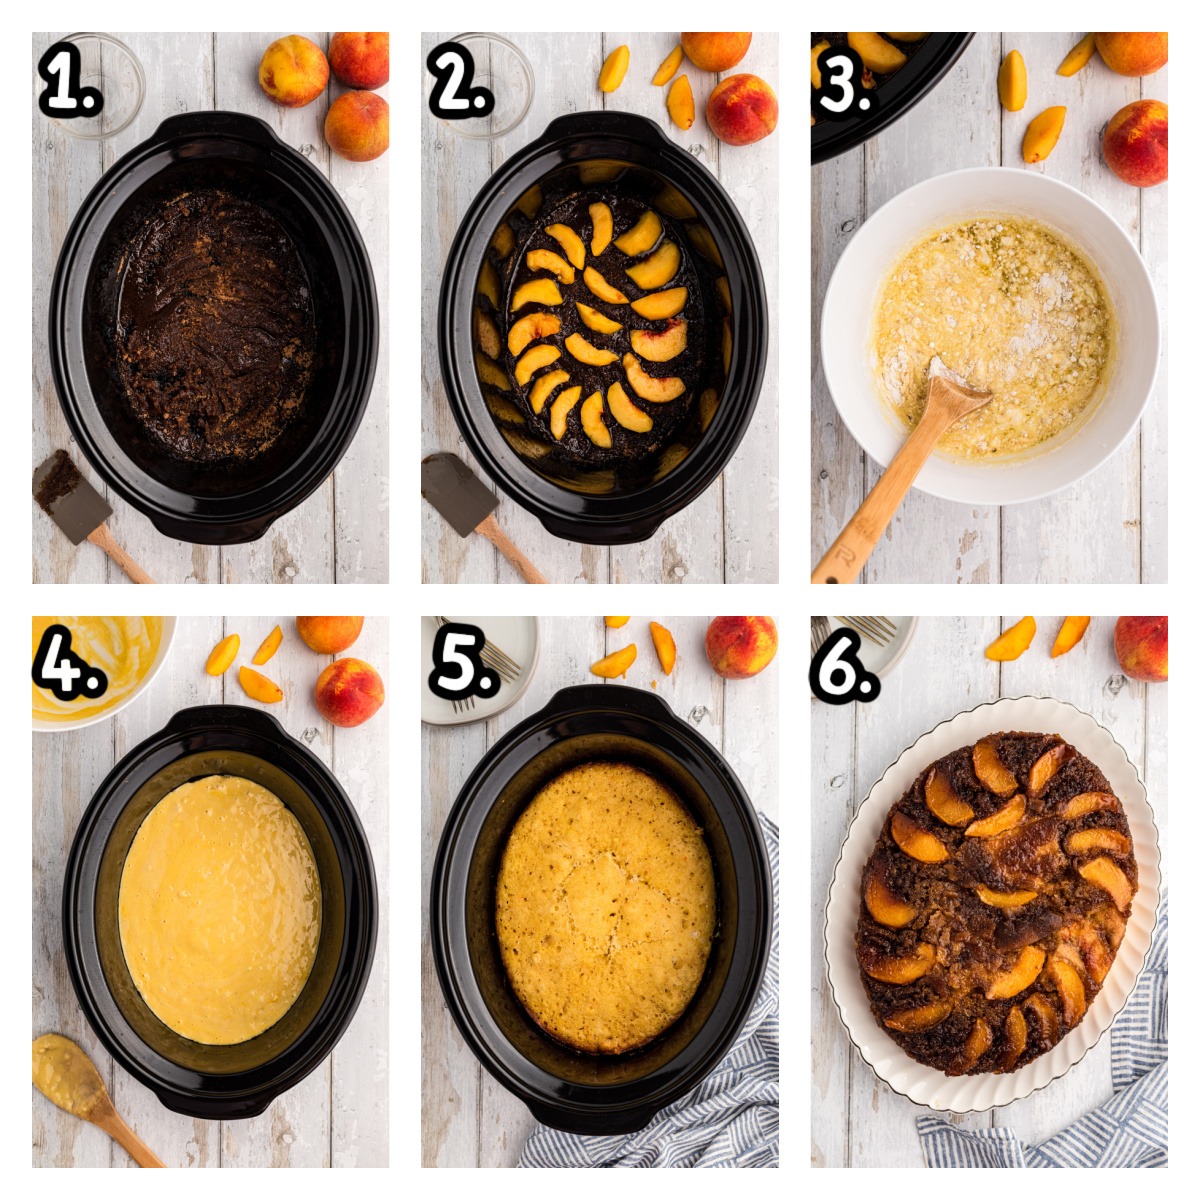 Six images showing how to make peach upside down cake in a slow cooker.